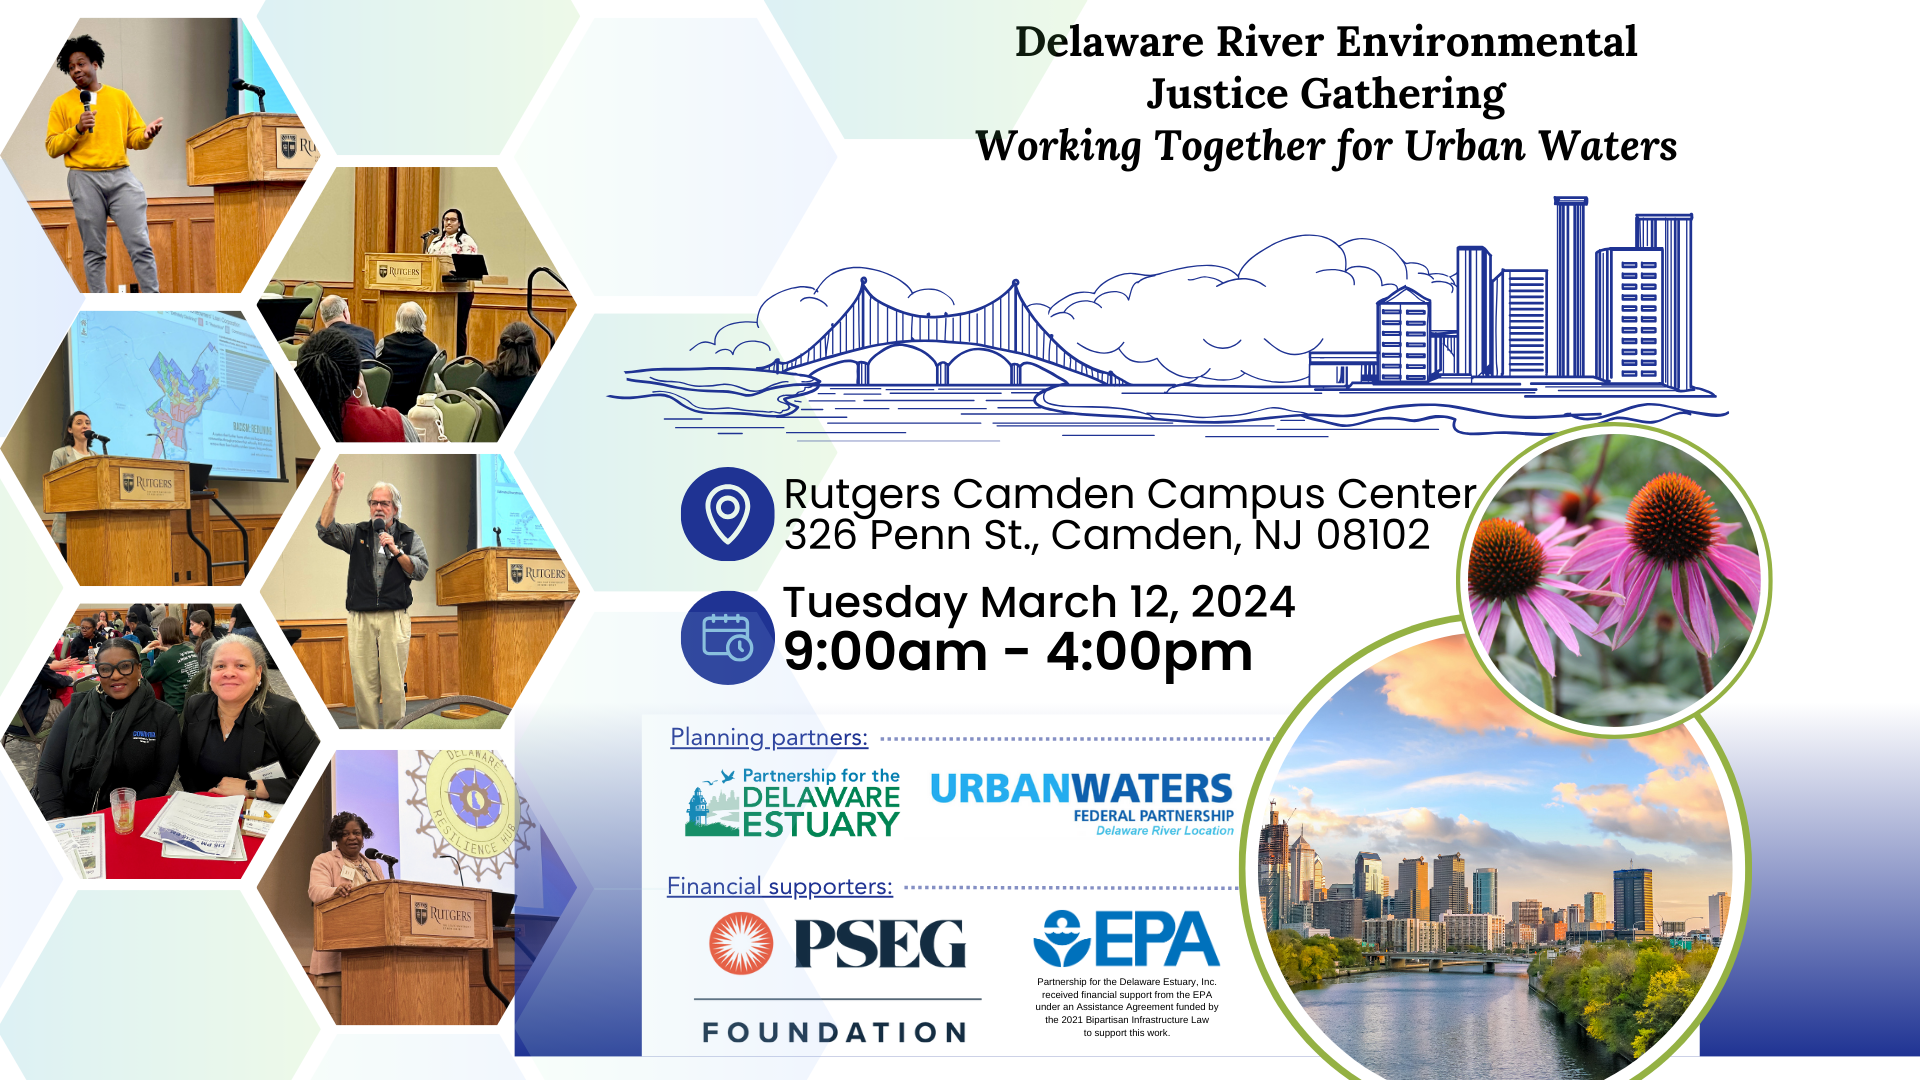 Thank you for Attending the Delaware River Environmental Justice Gathering